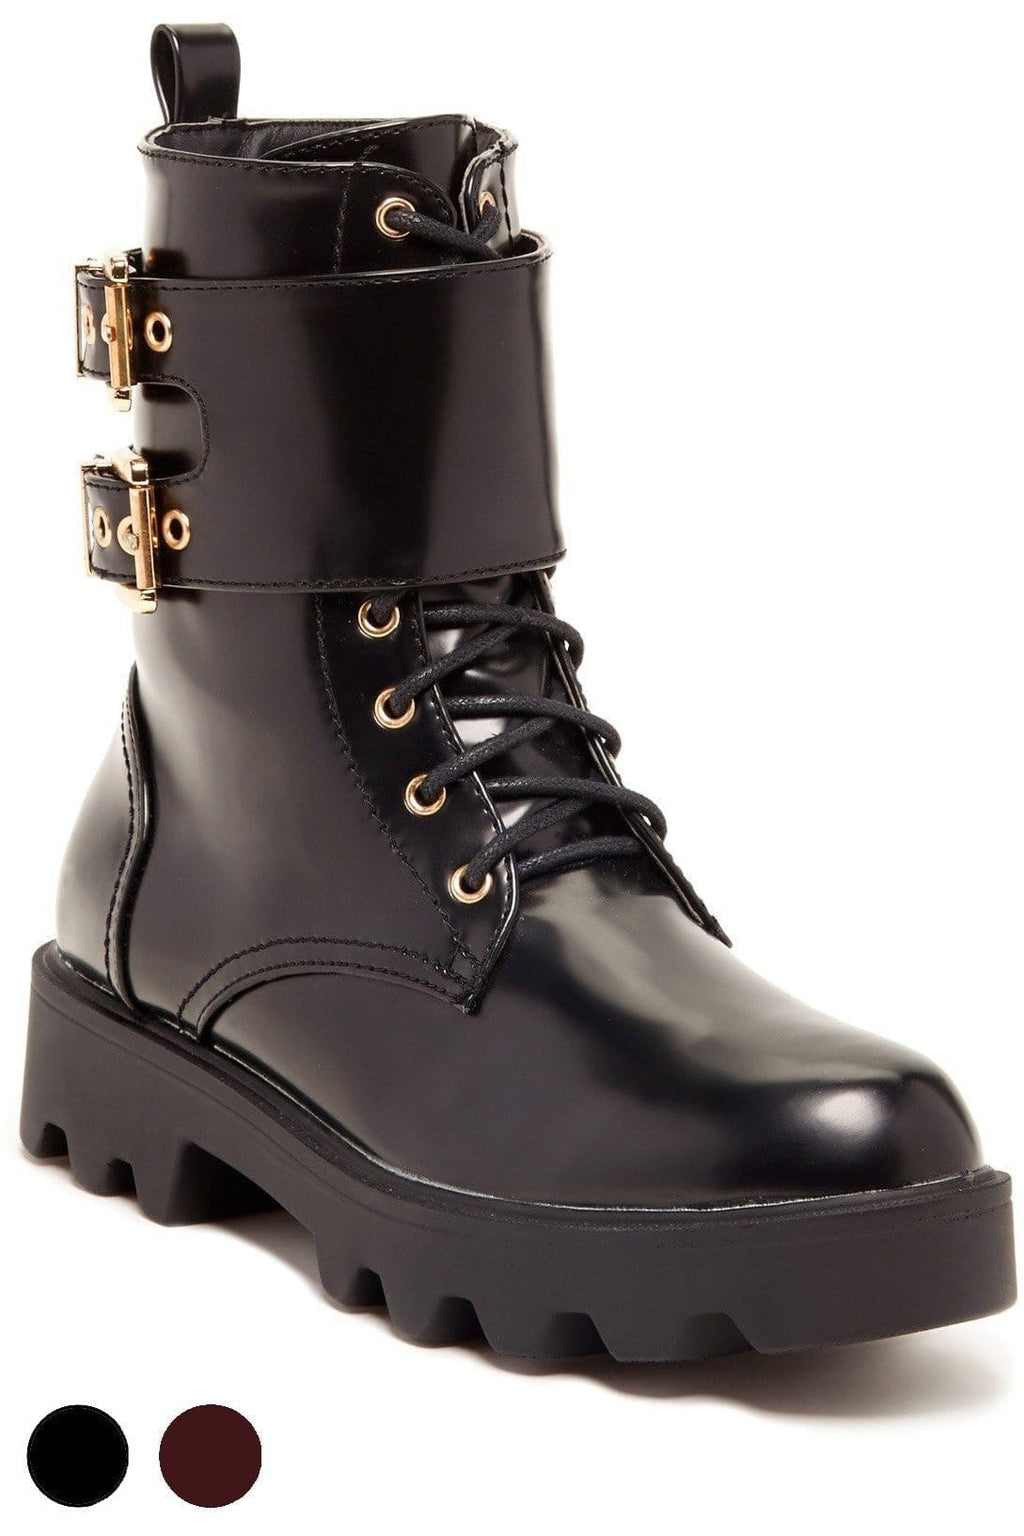 N.Y.L.A. SHOES BOOTS 6 / BLK-BOX N.Y.L.A. Shoes Bryana Women's Combat Boots with Inside Zipper in Burgundy or Black